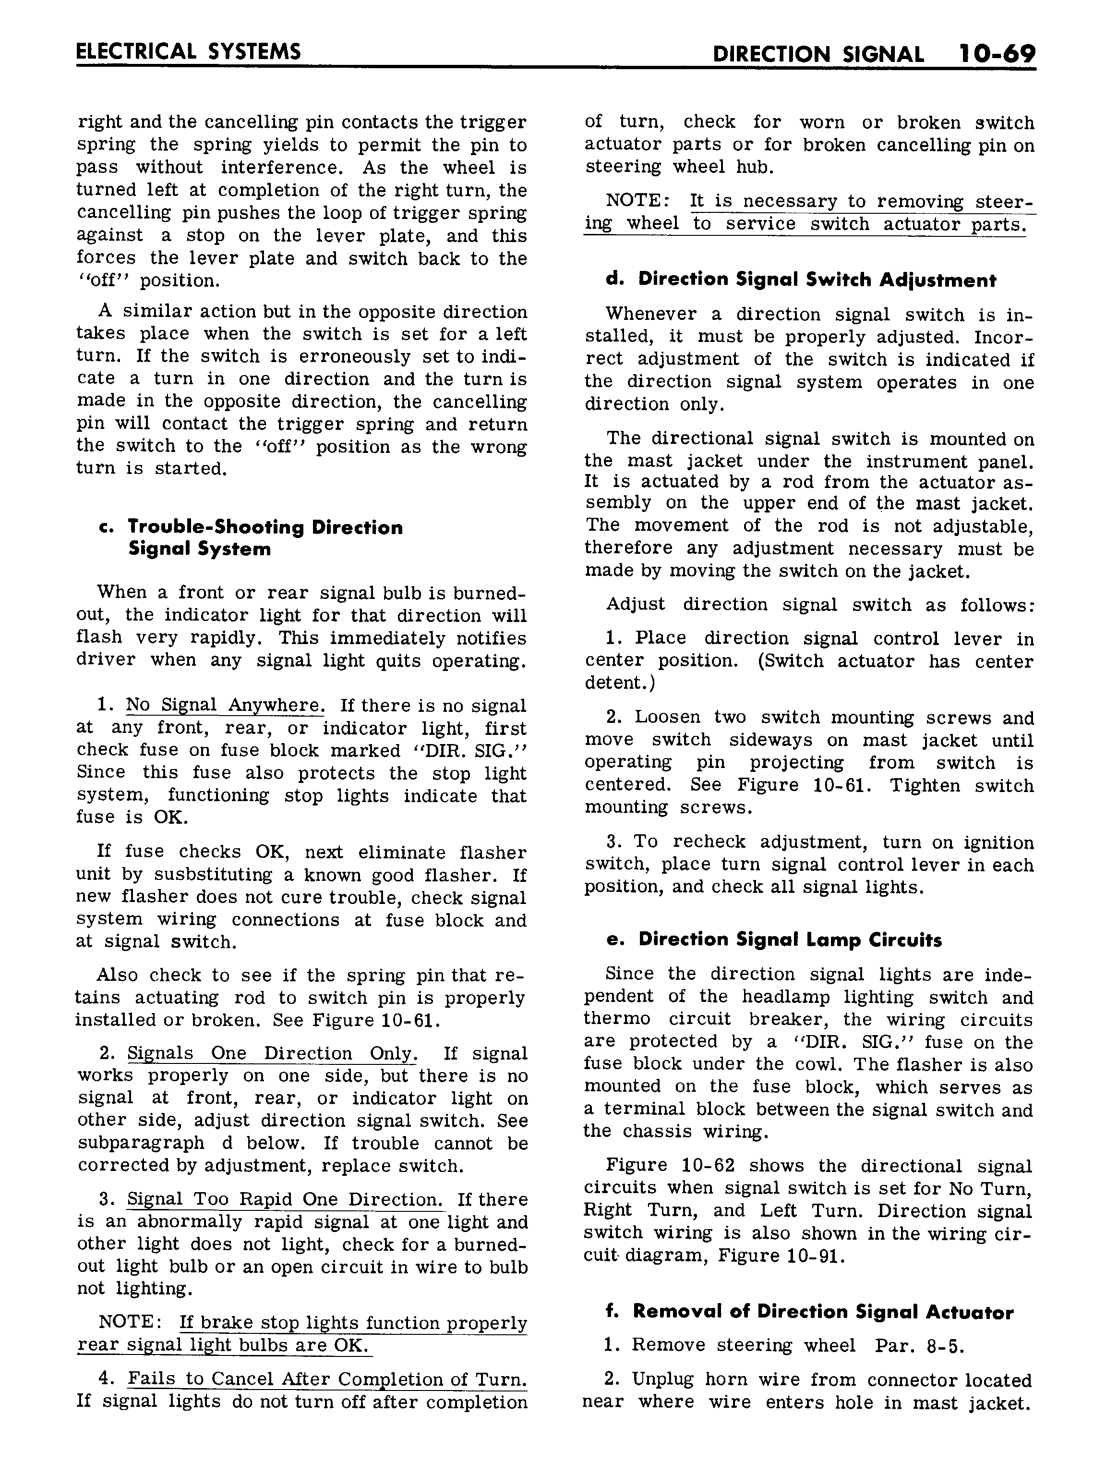 n_10 1961 Buick Shop Manual - Electrical Systems-069-069.jpg